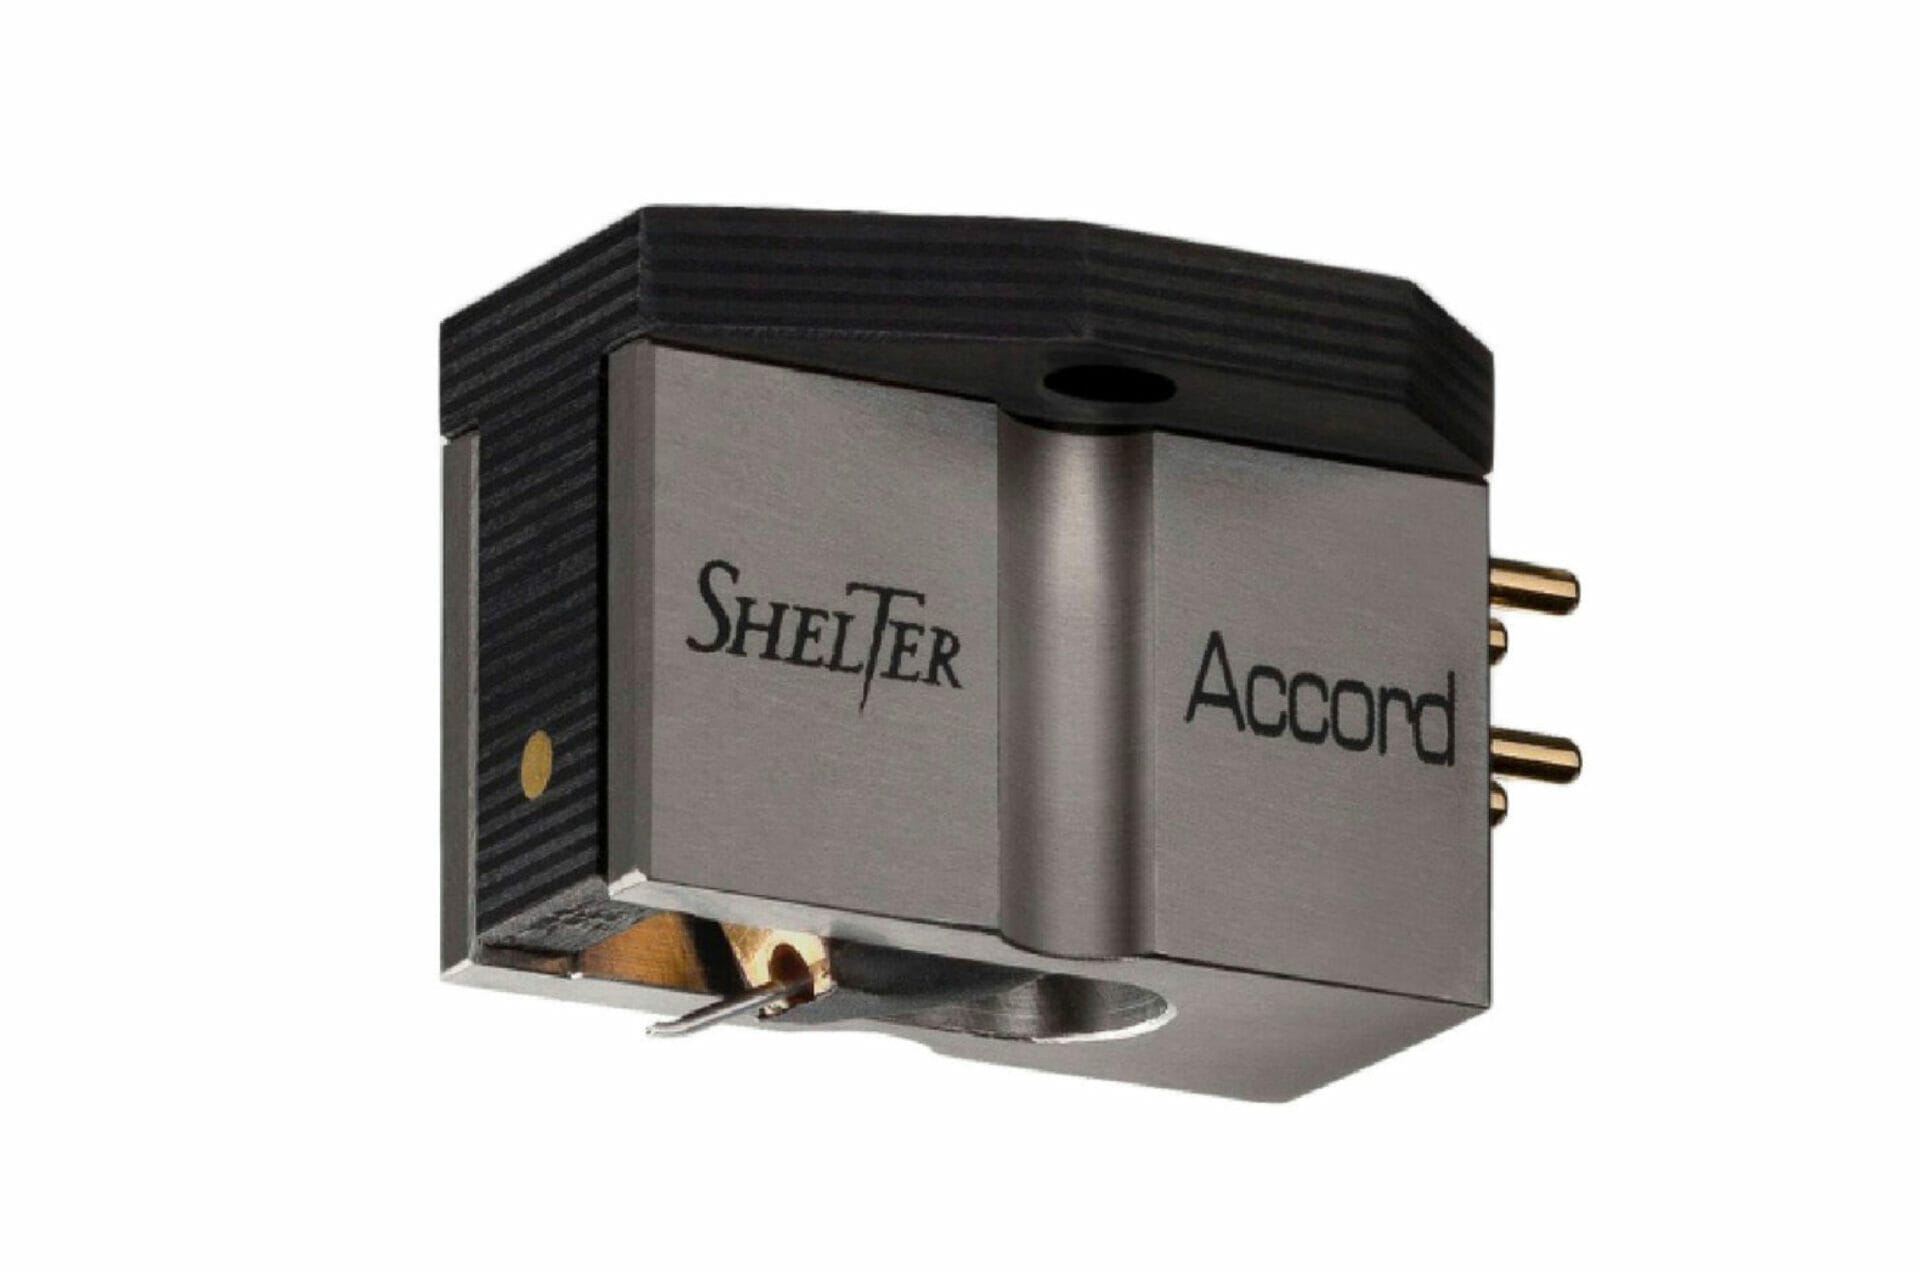 Shelter Accord